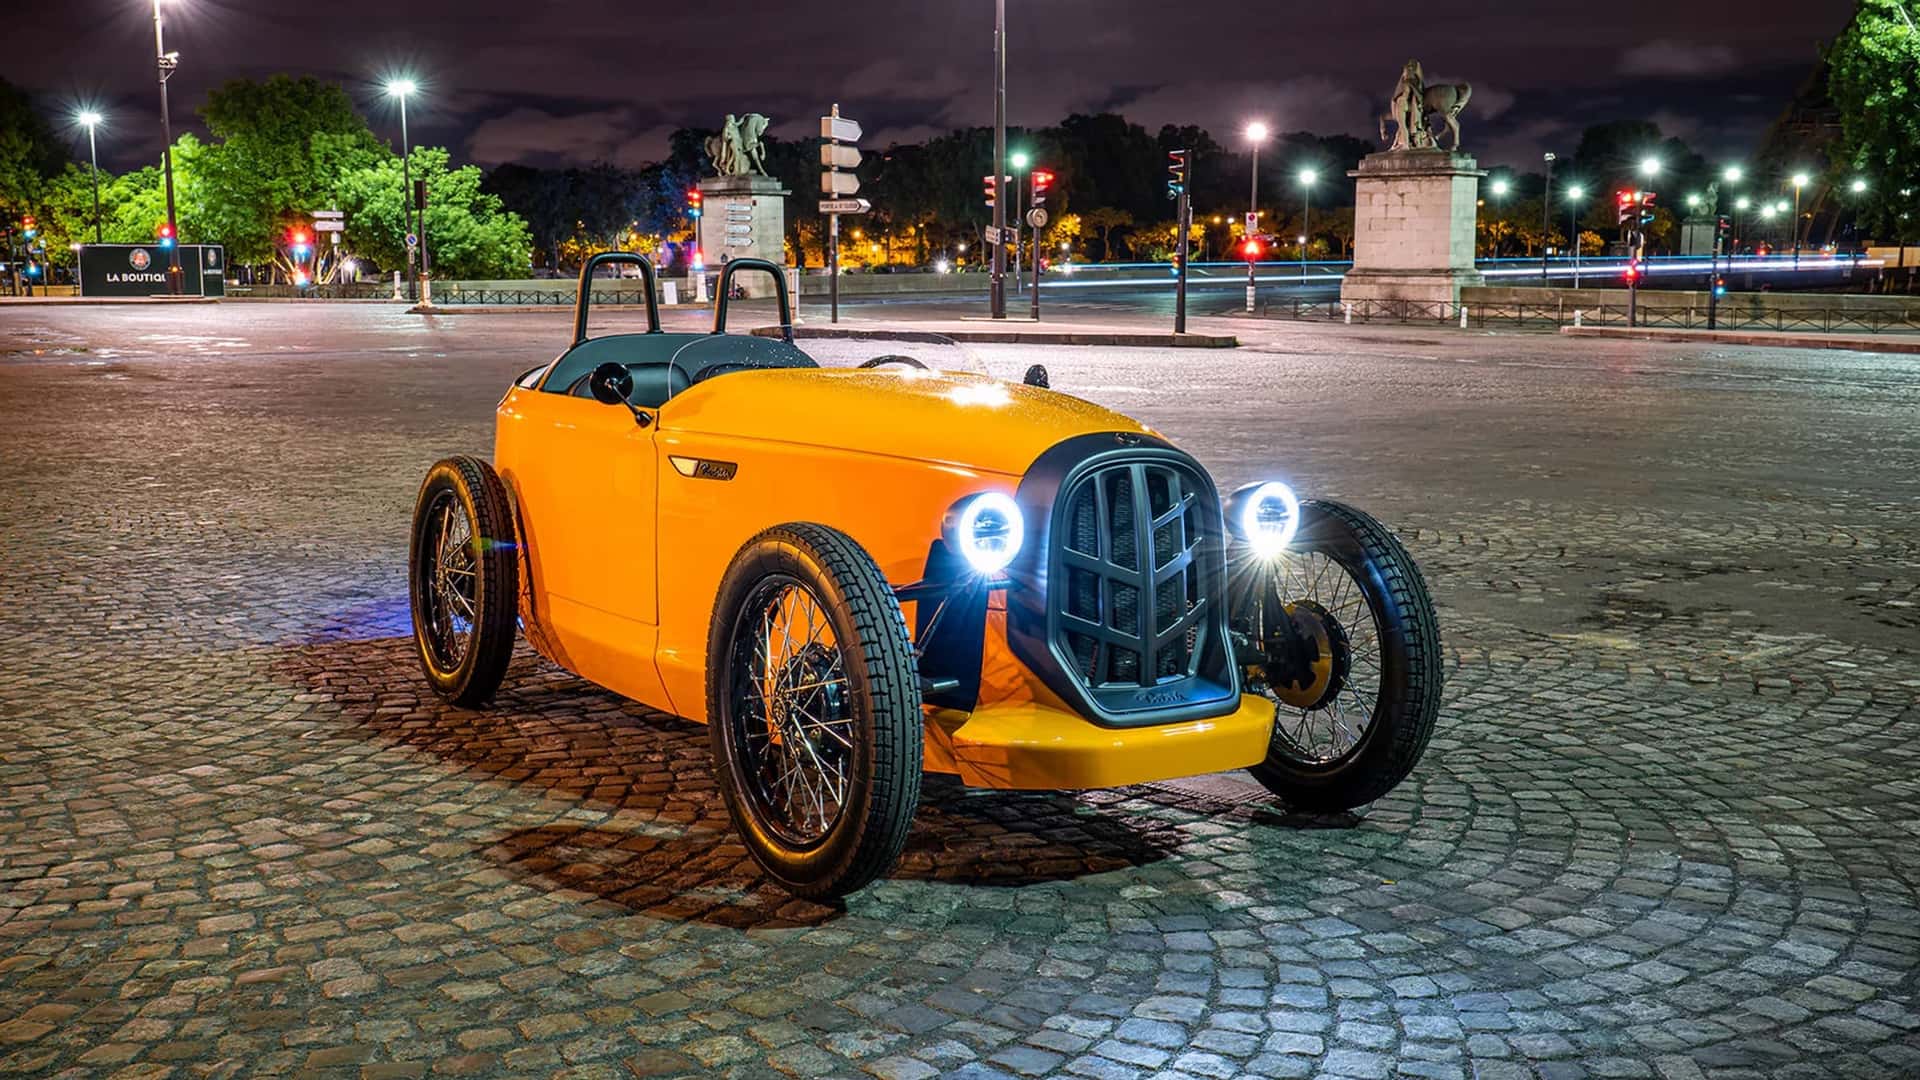 the patak rodster is a retro-inspired electric microcar from slovakia